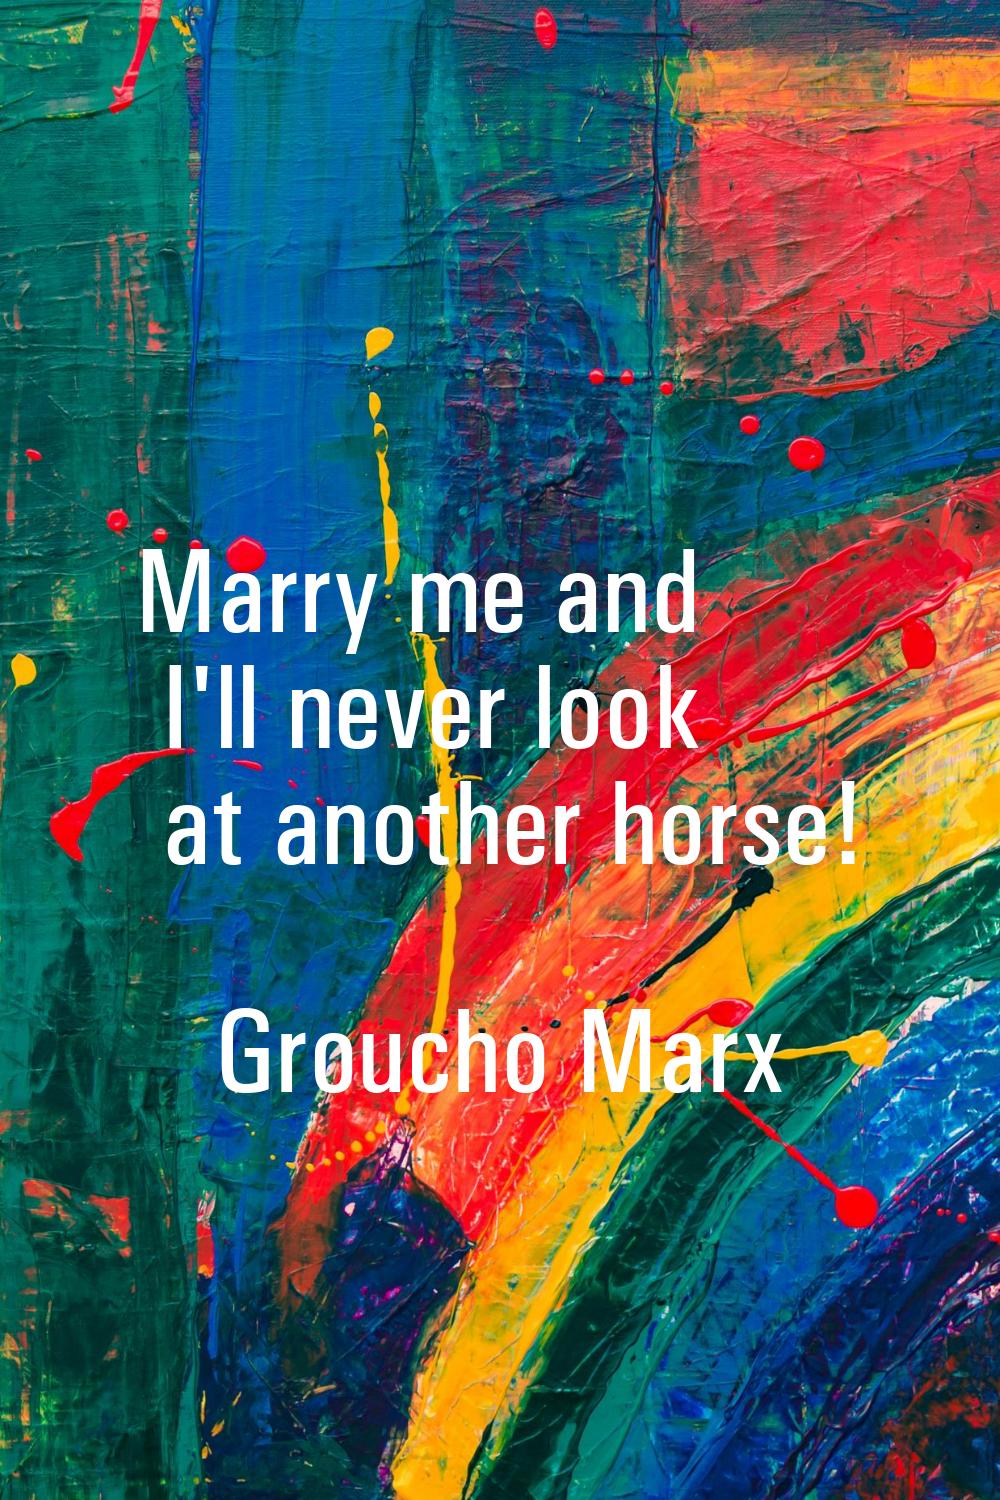 Marry me and I'll never look at another horse!